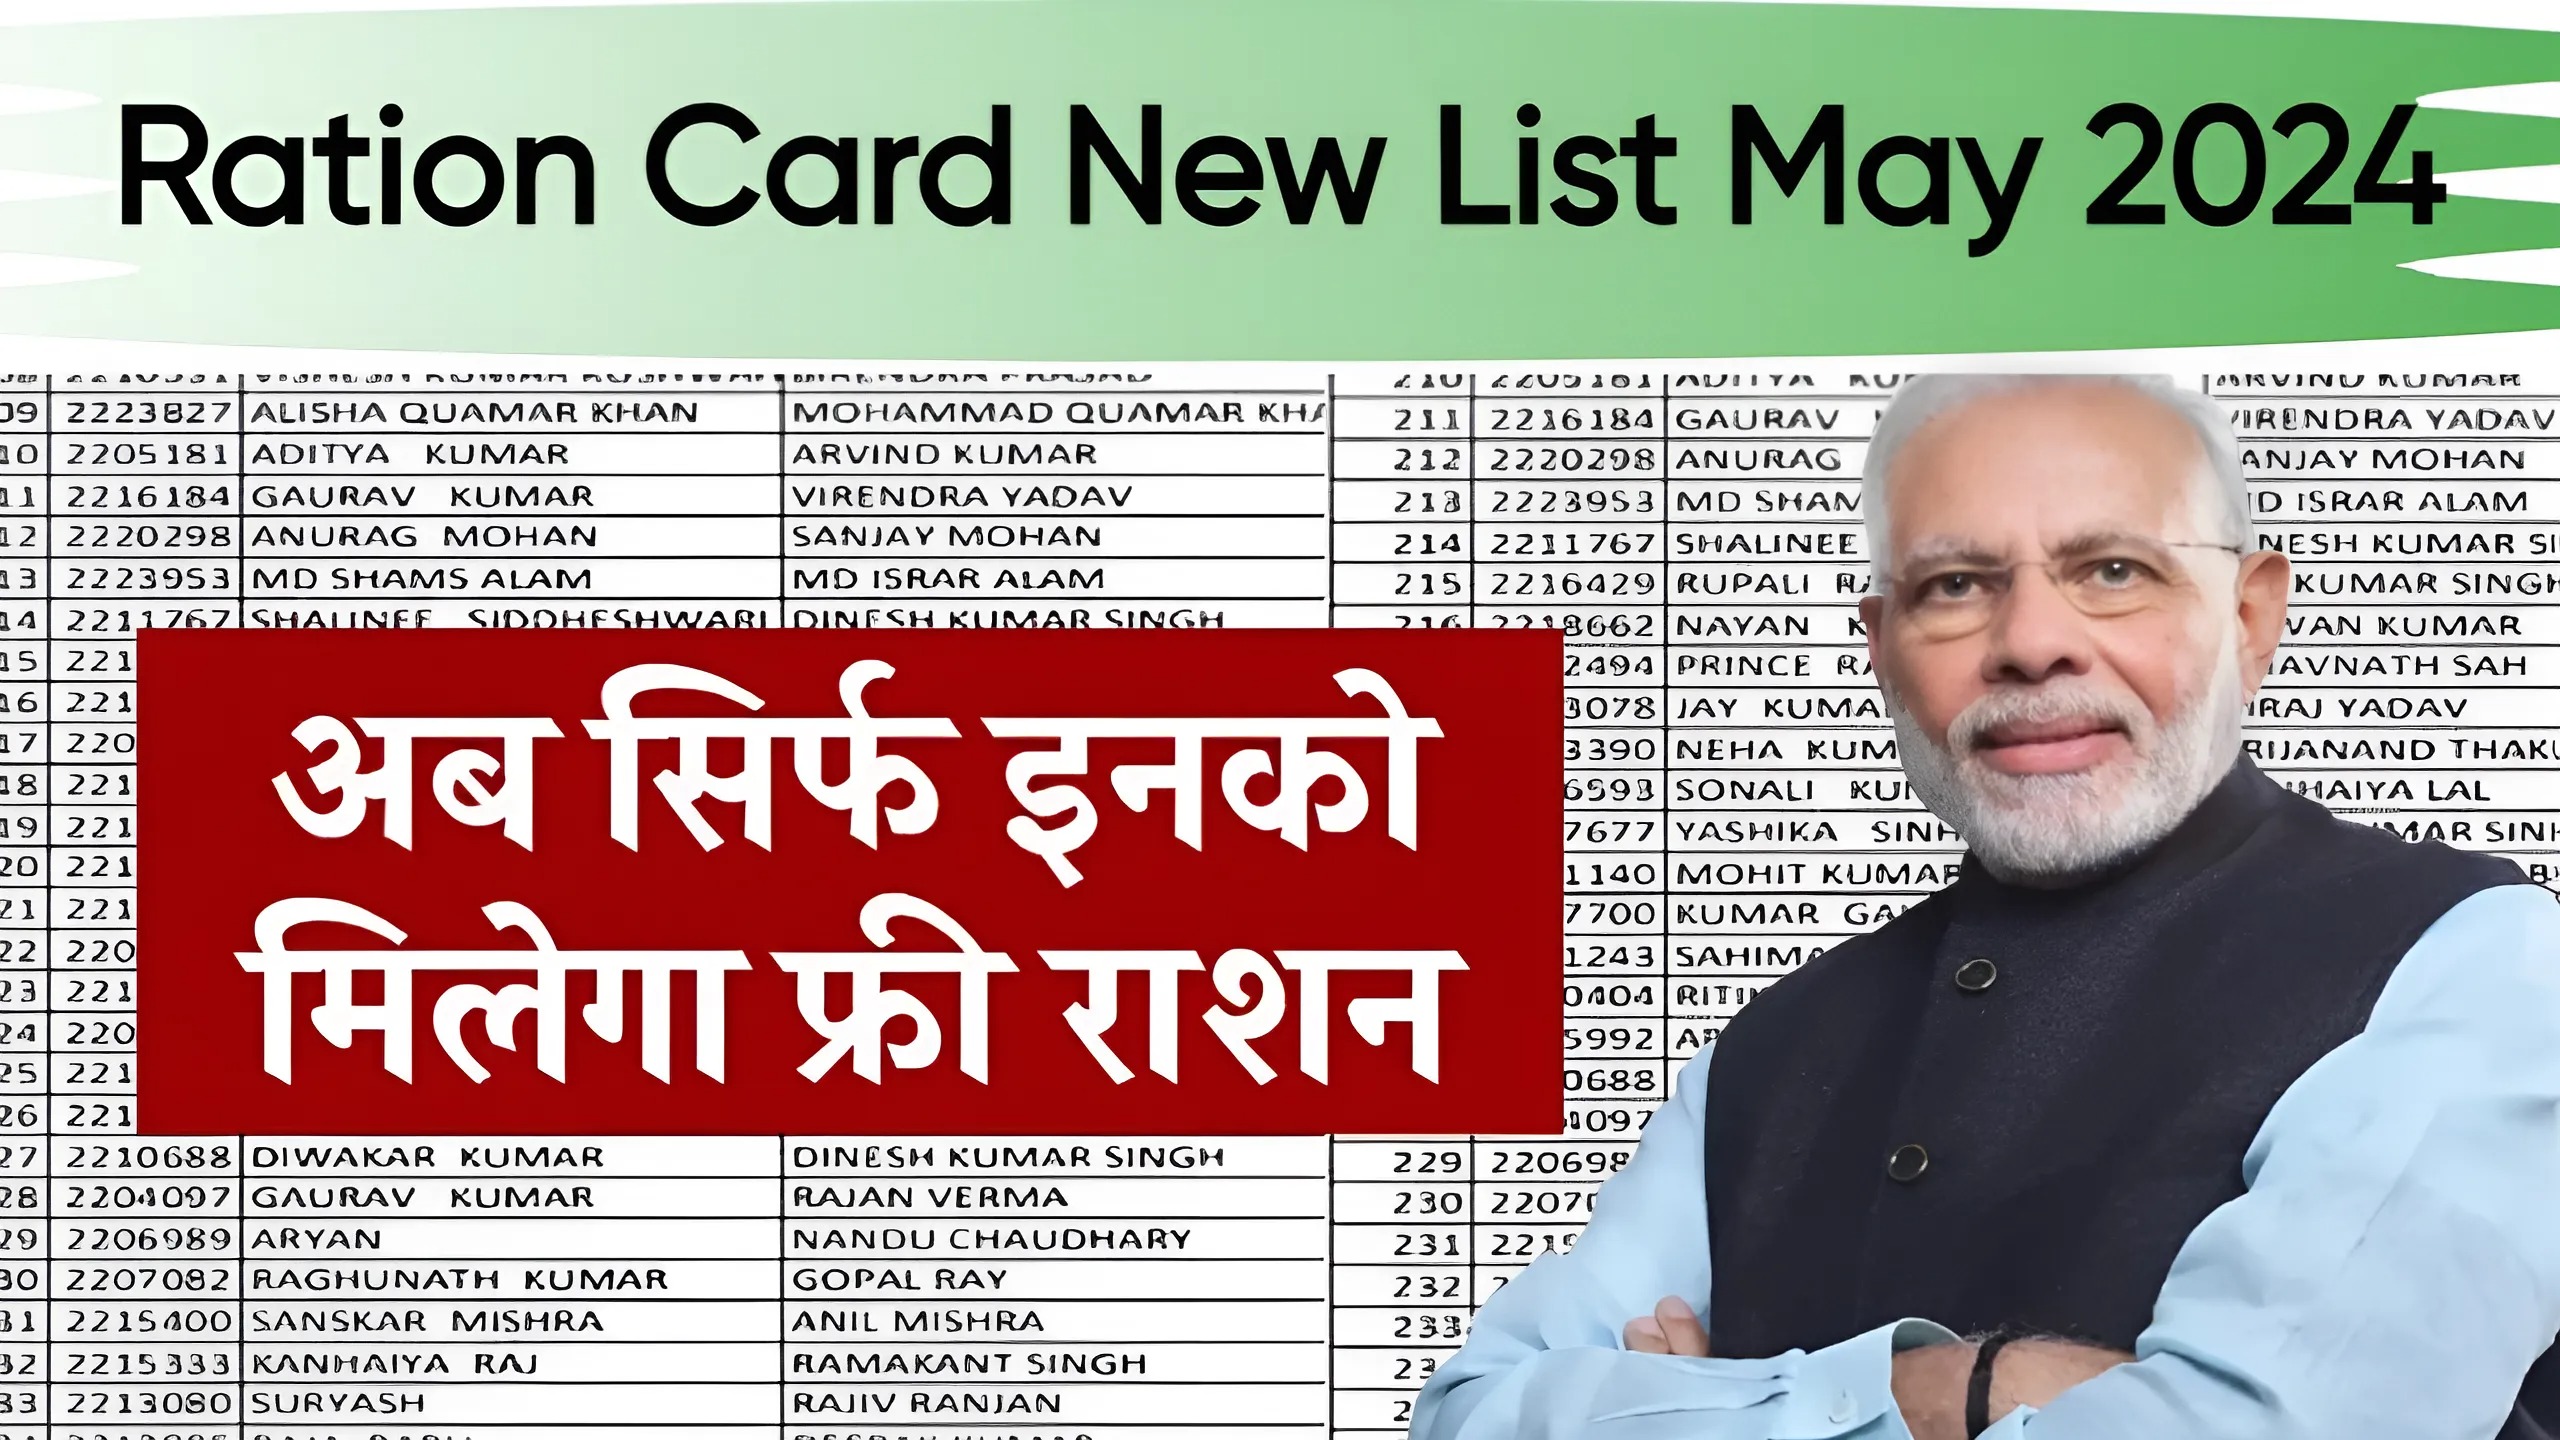 Ration Card New List May